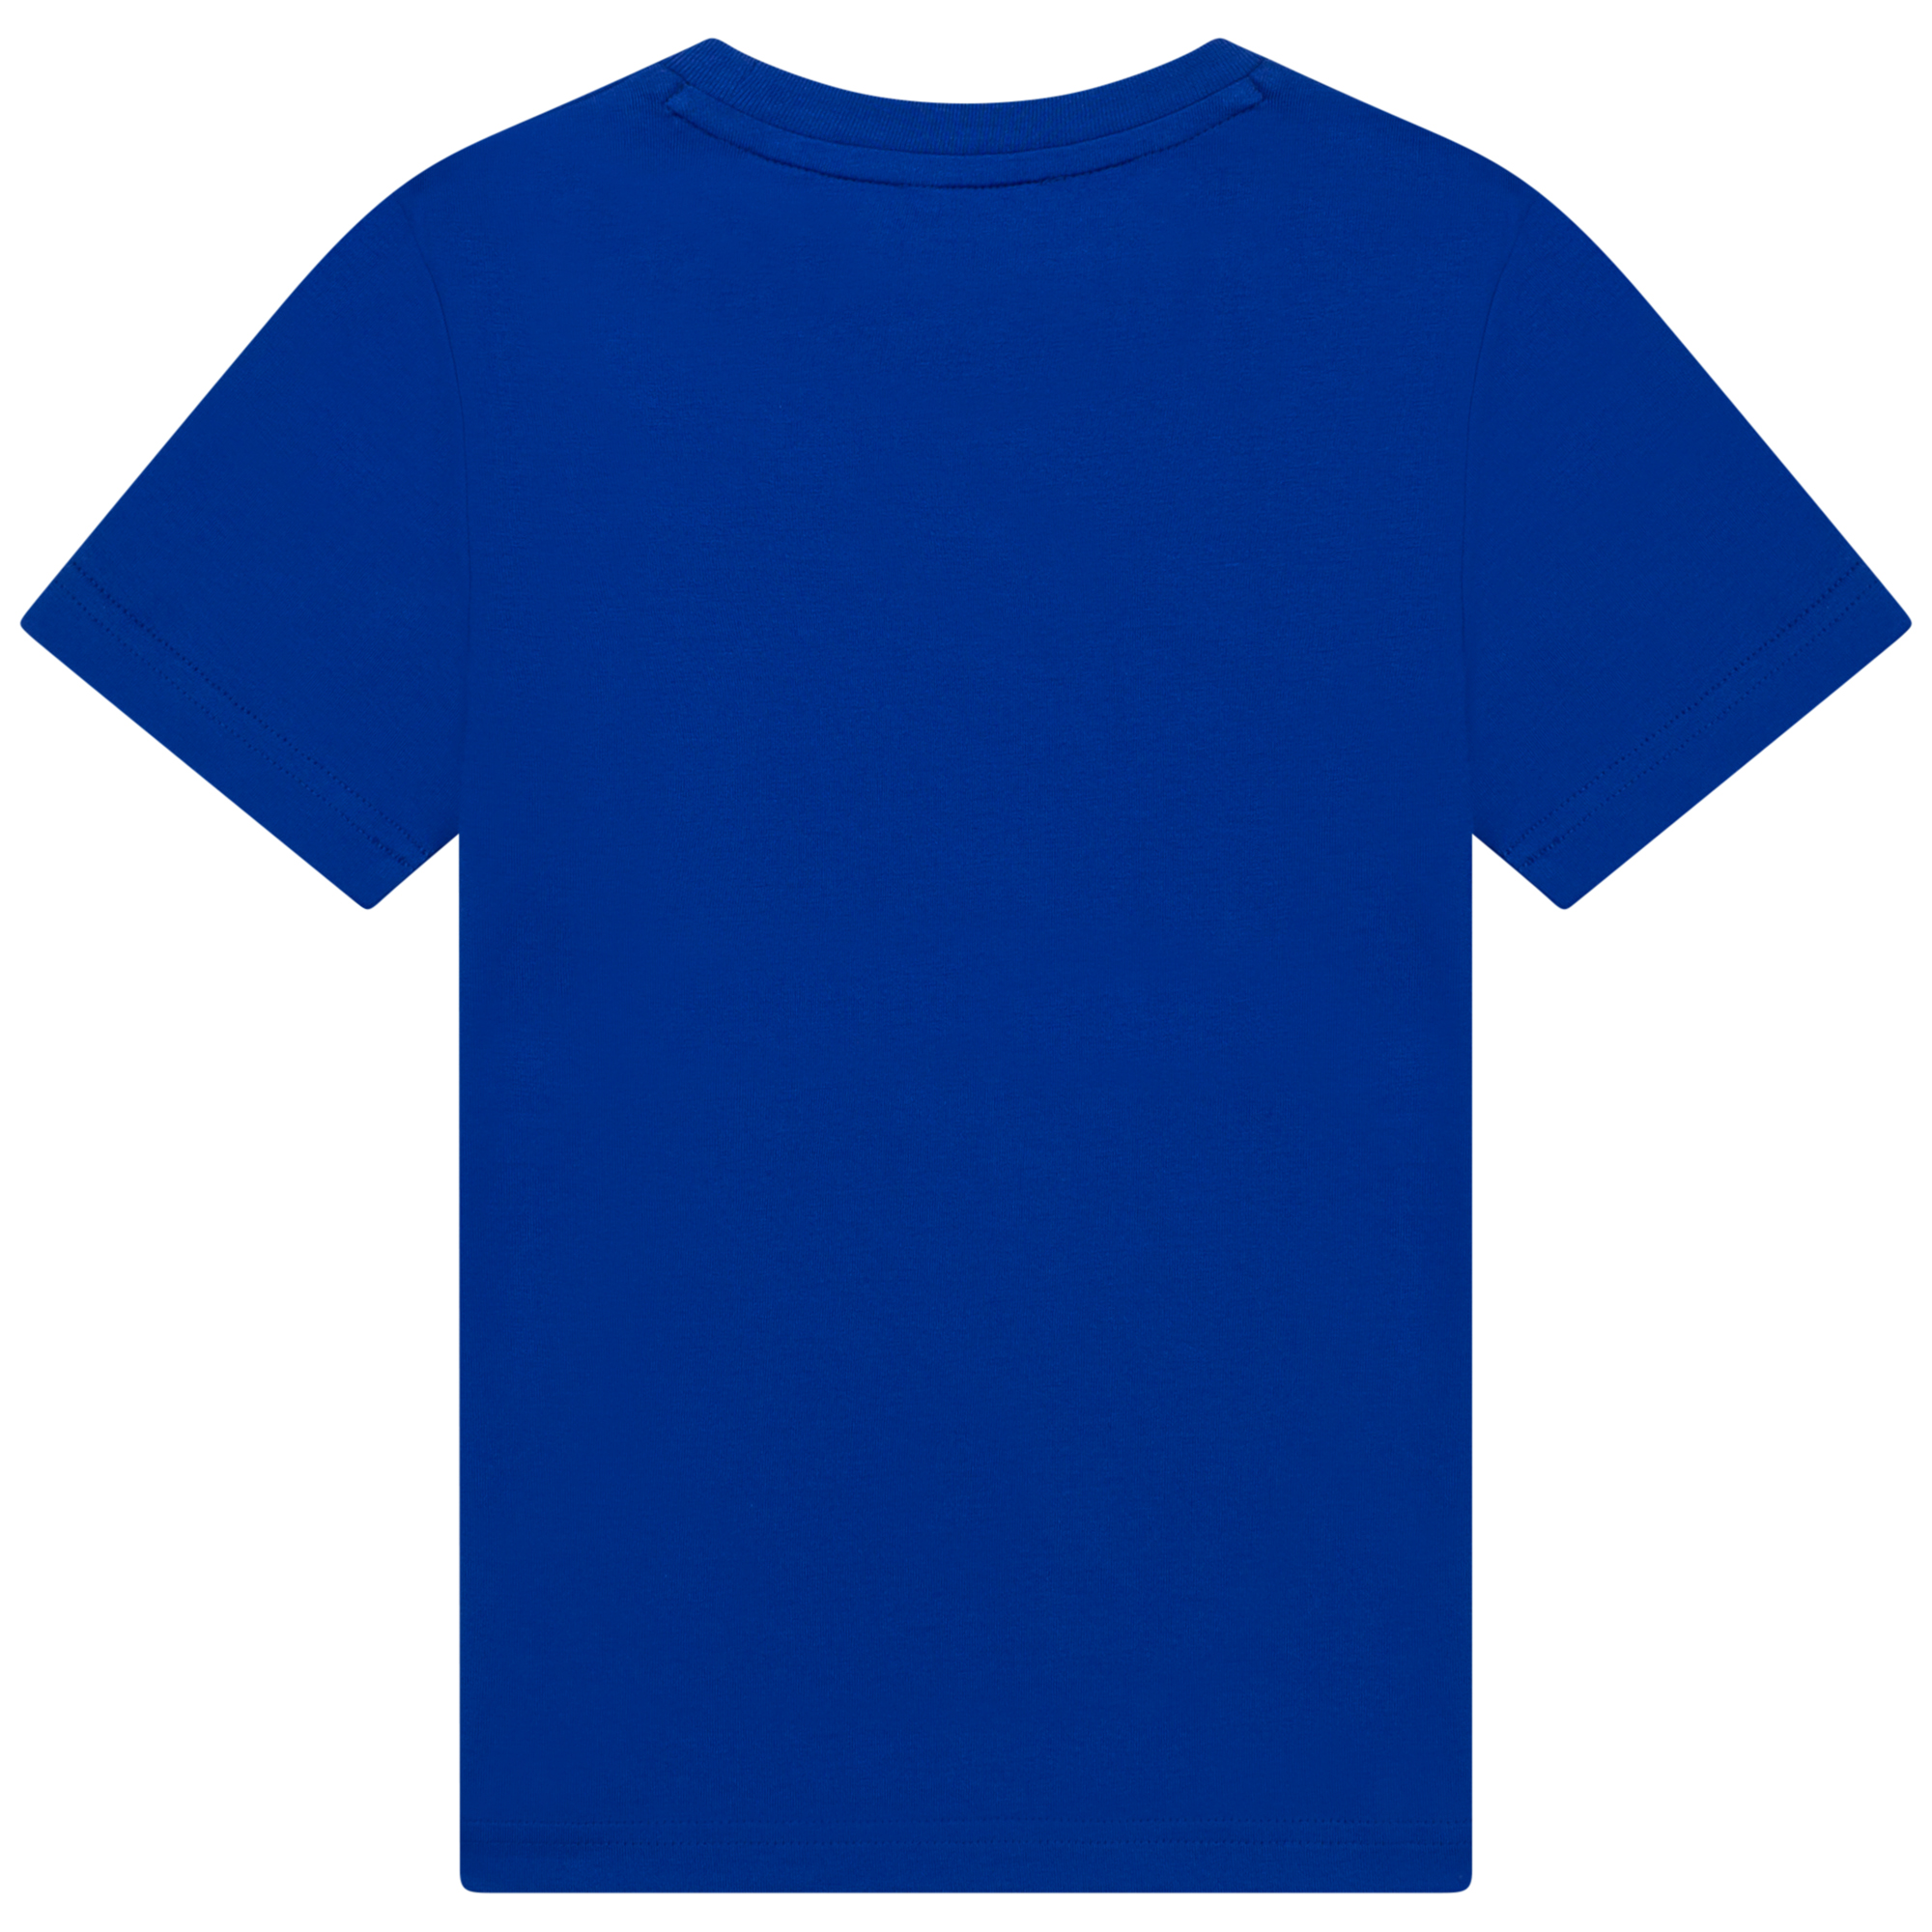 Cotton jersey t-shirt DKNY for BOY